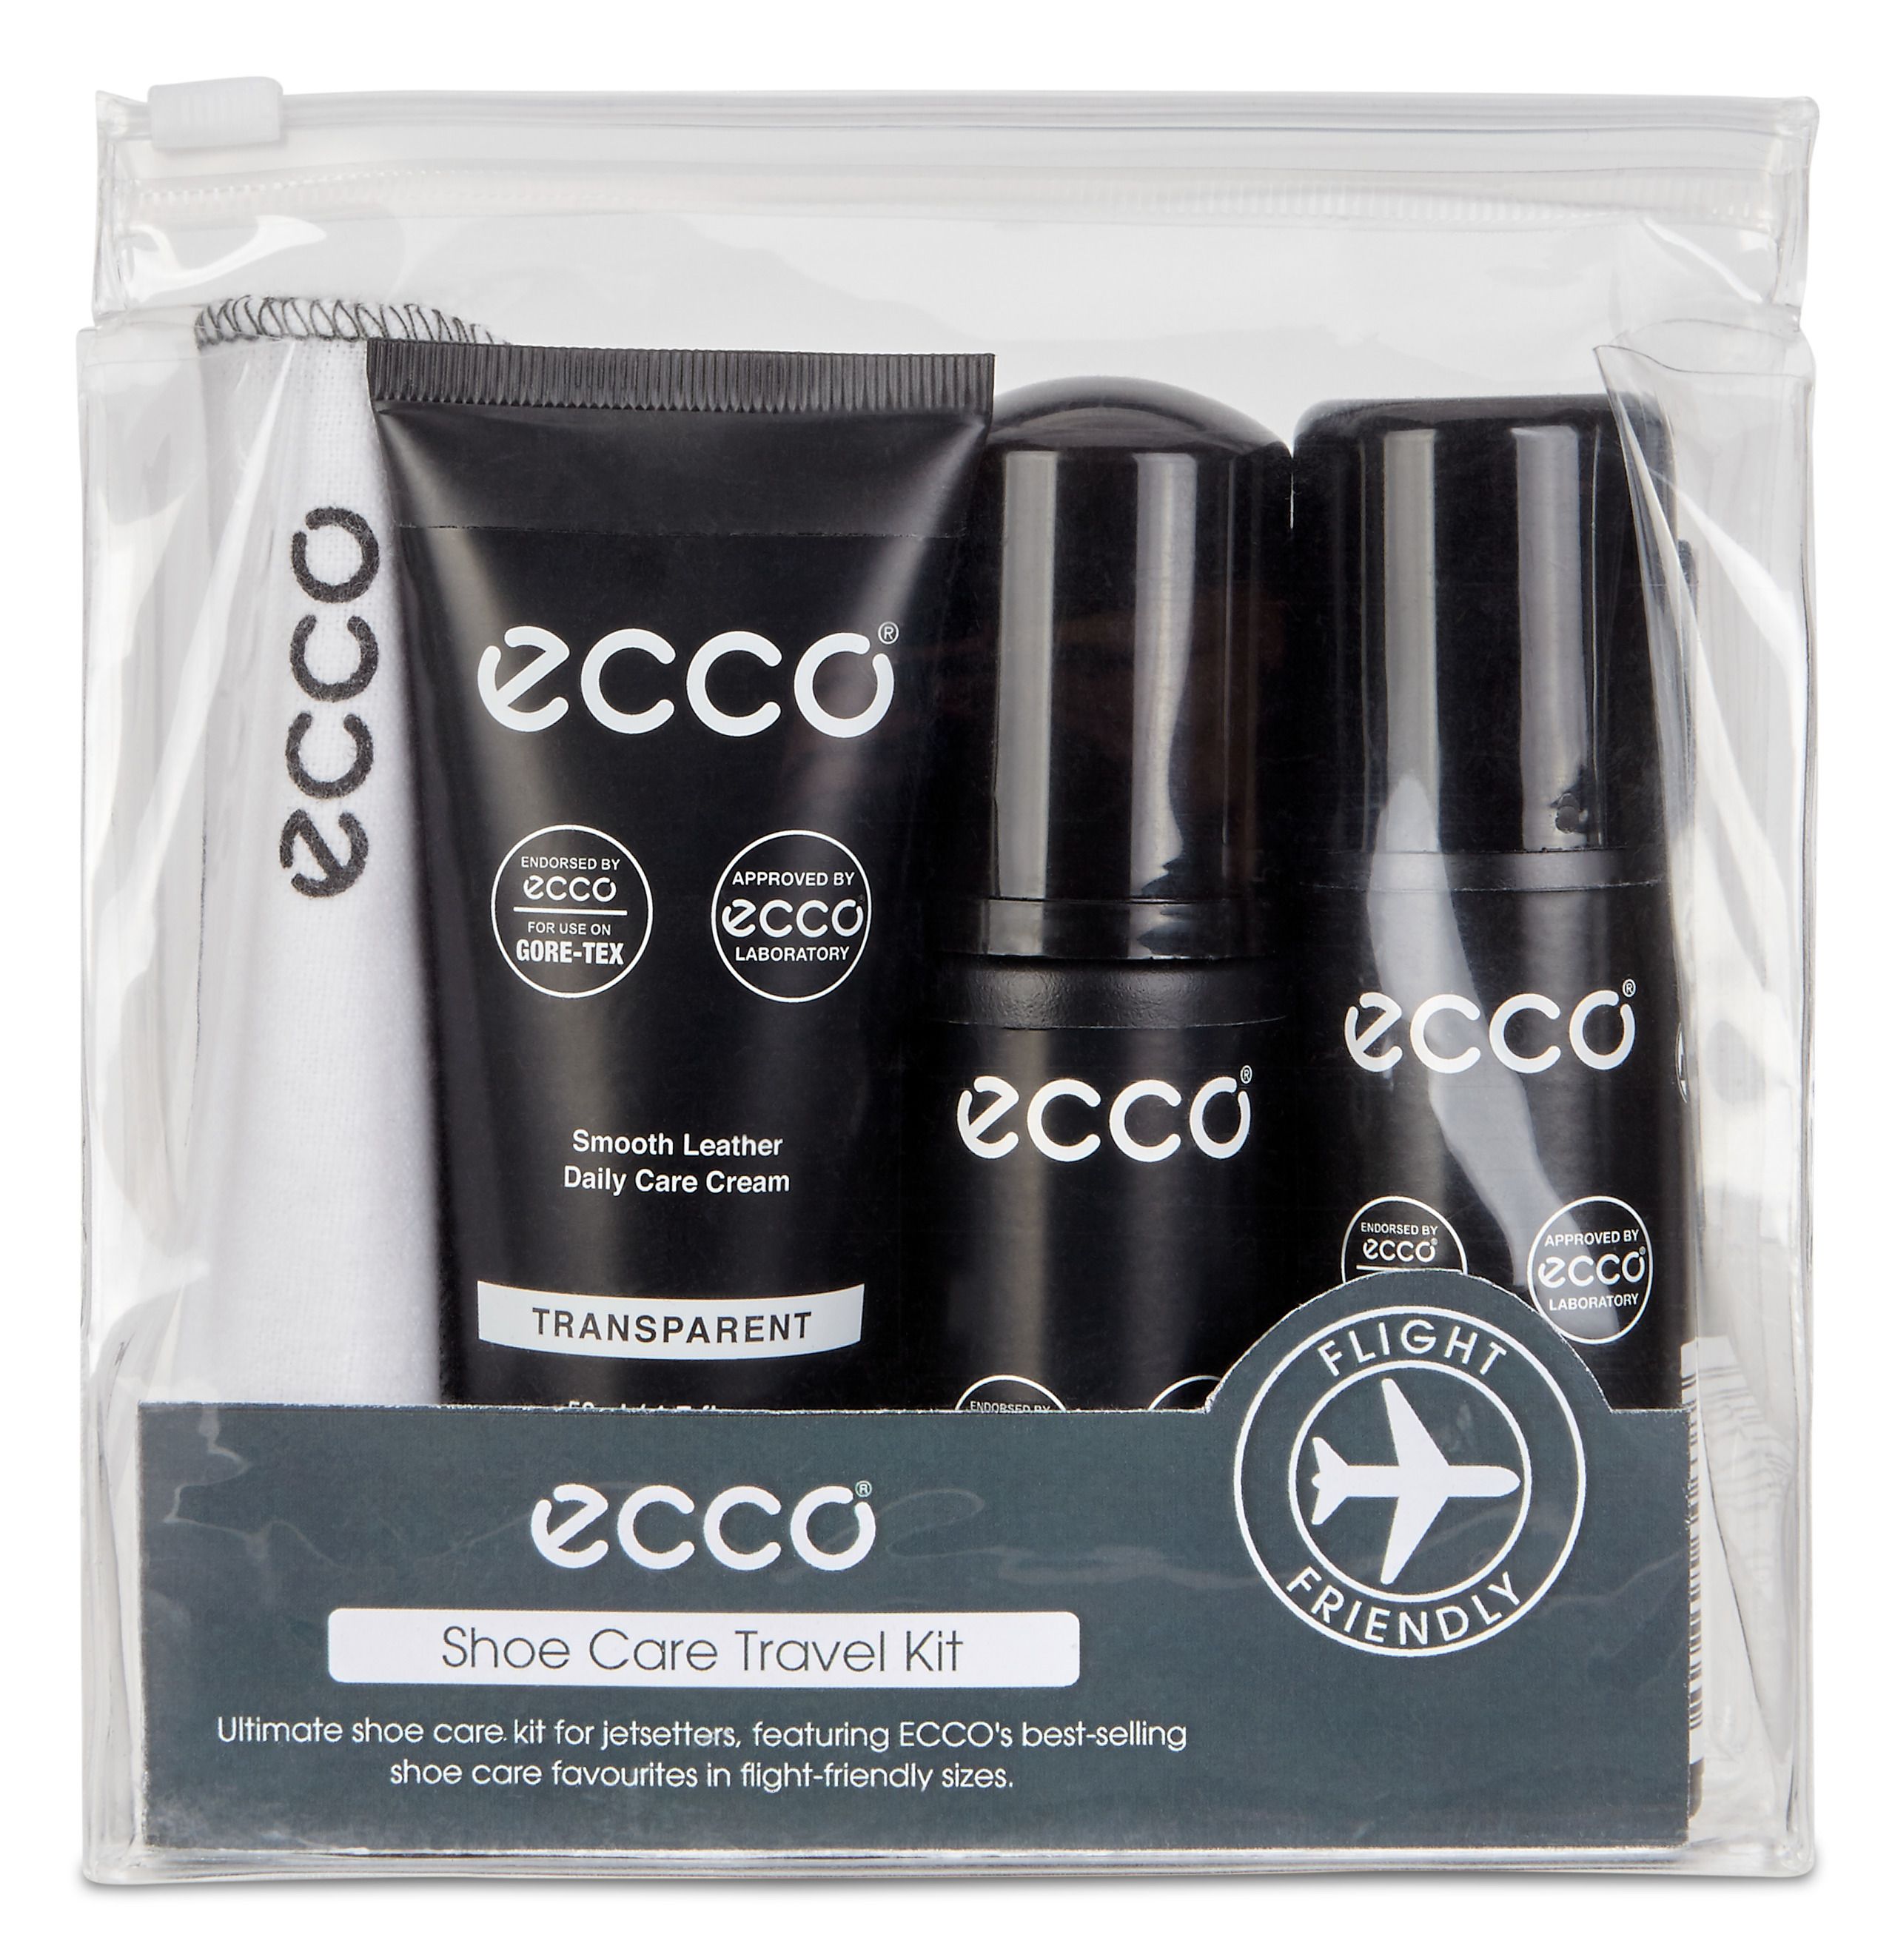 ecco leather cleaner